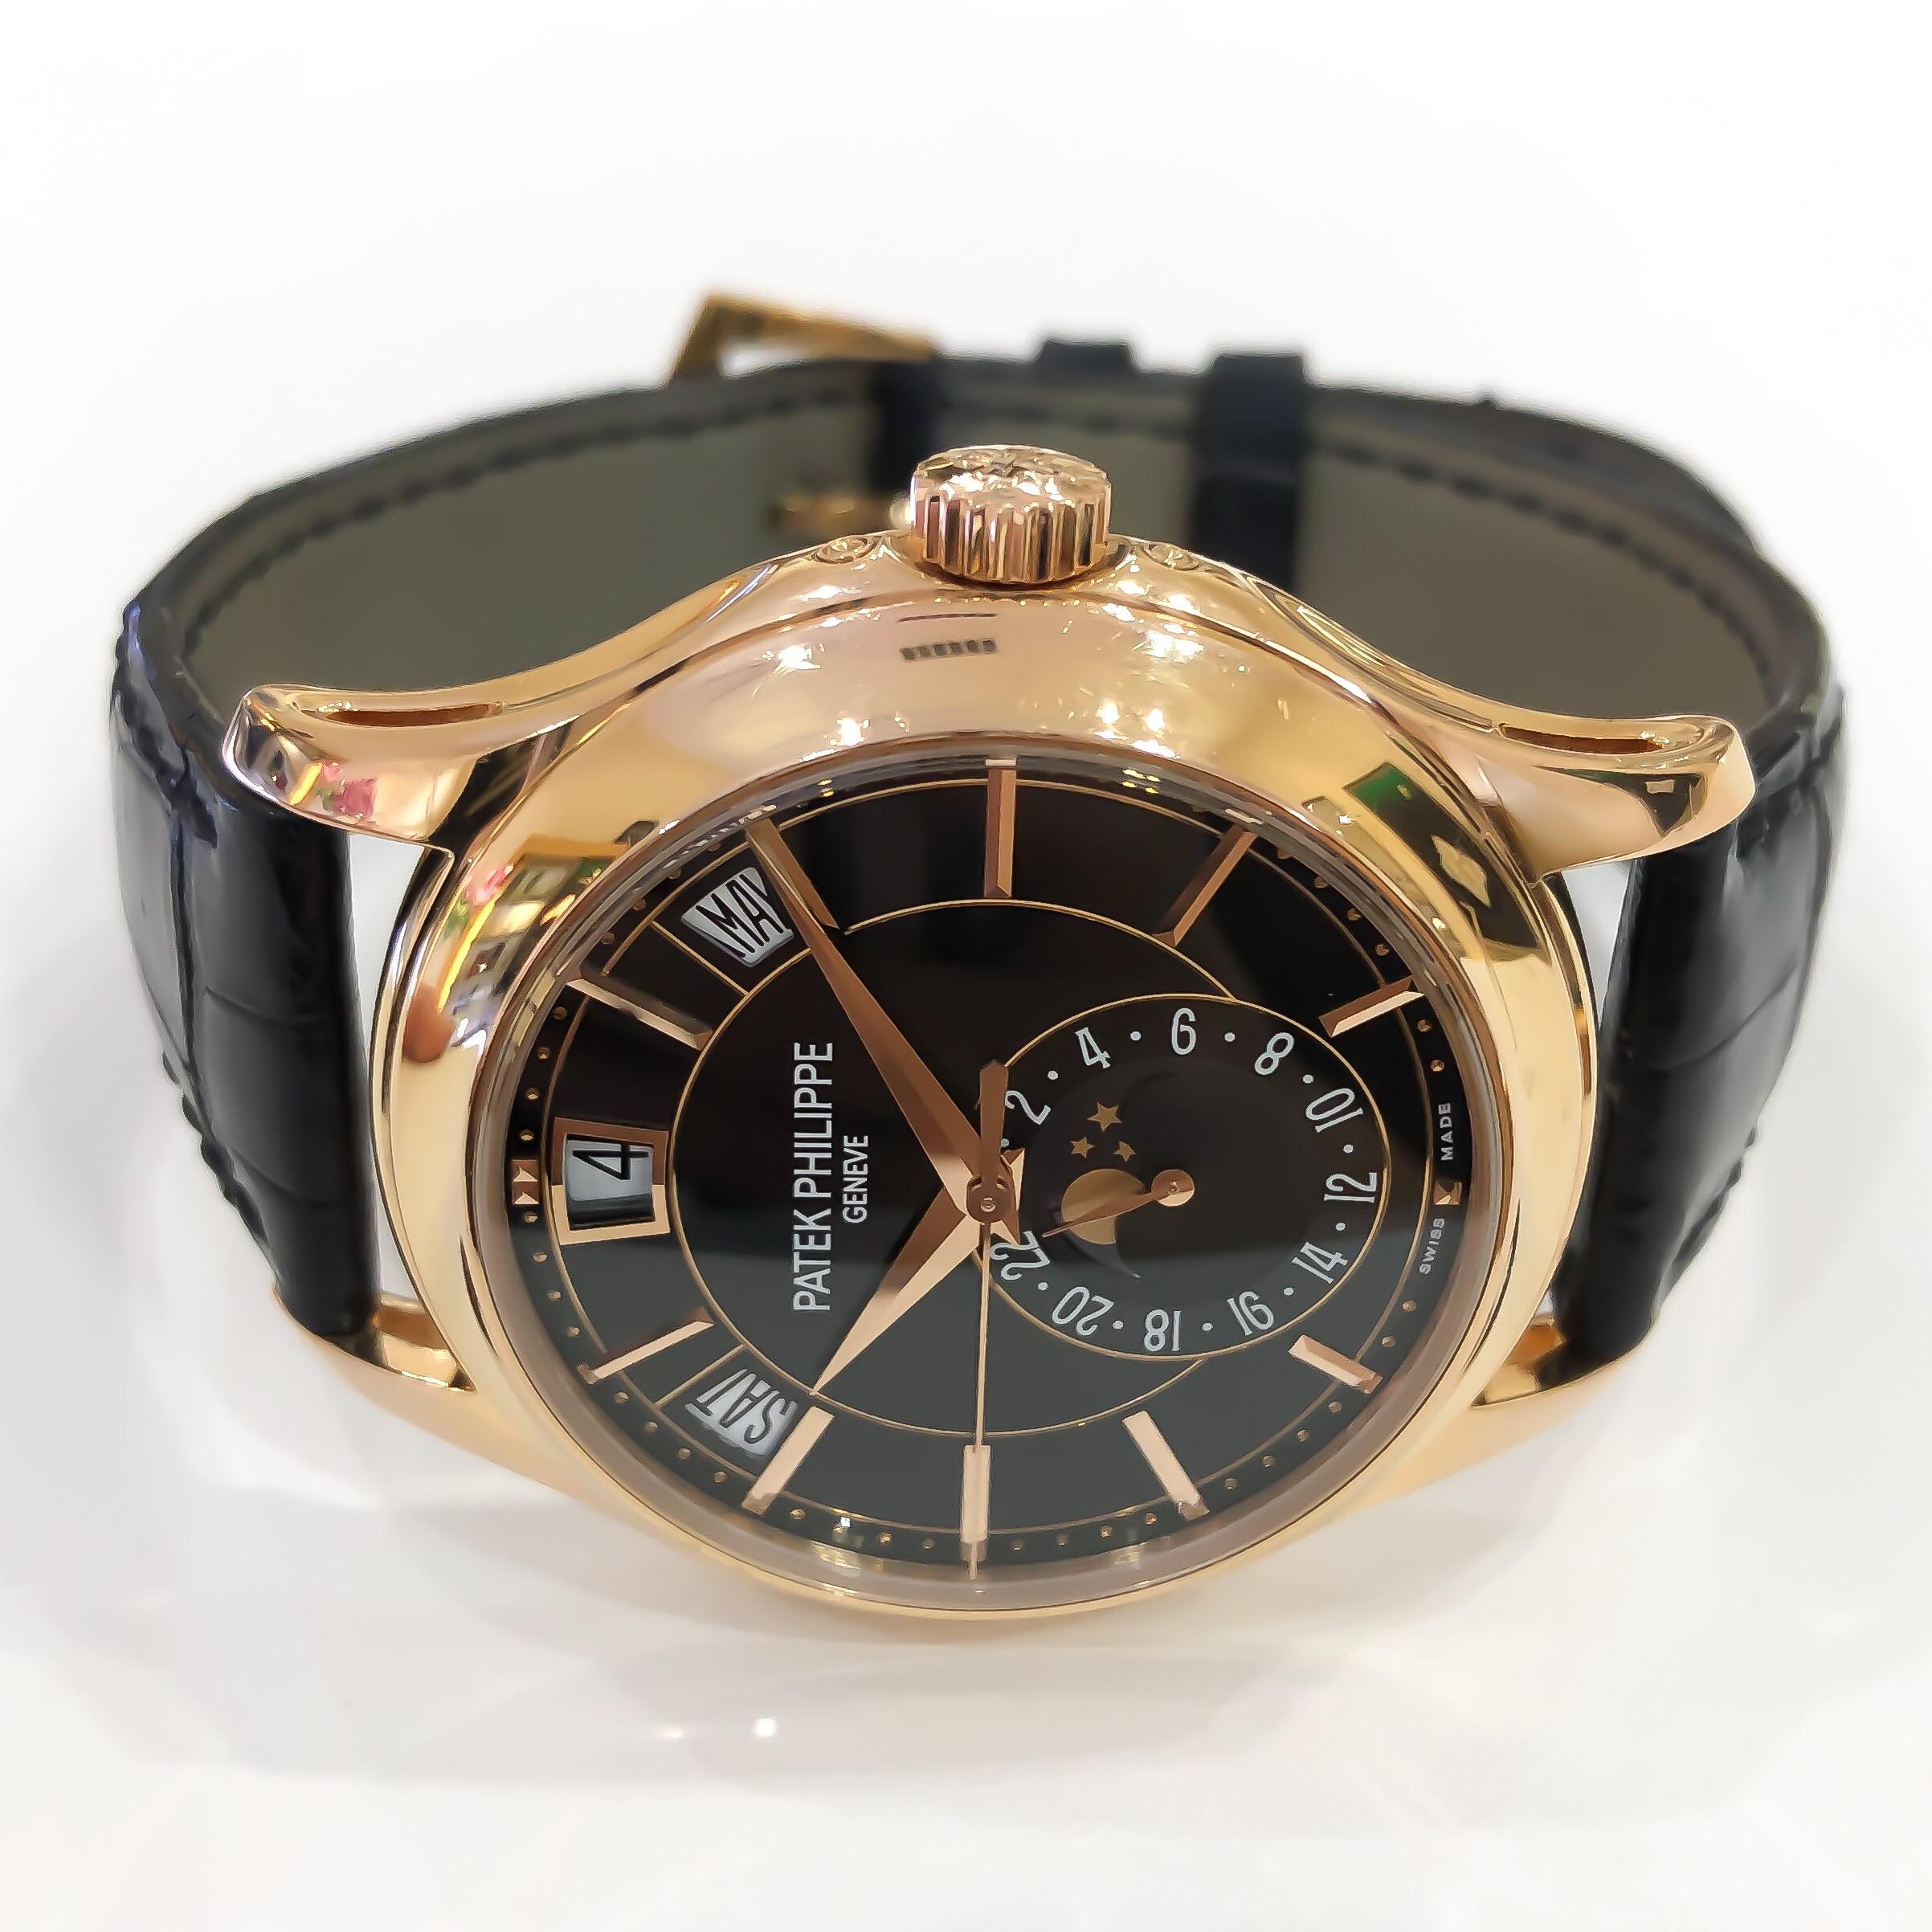 Men's Luxury Patek Philippe Complications Automatic Watch 18K Rose Gold 5205R. Excellent like new condition! Not pictured but comes with all original paperwork, booklet and box. 

•MODEL NO: 5205R
•MOVEMENT: AUTOMATIC MECHANICAL SELF-WINDING
•CASE